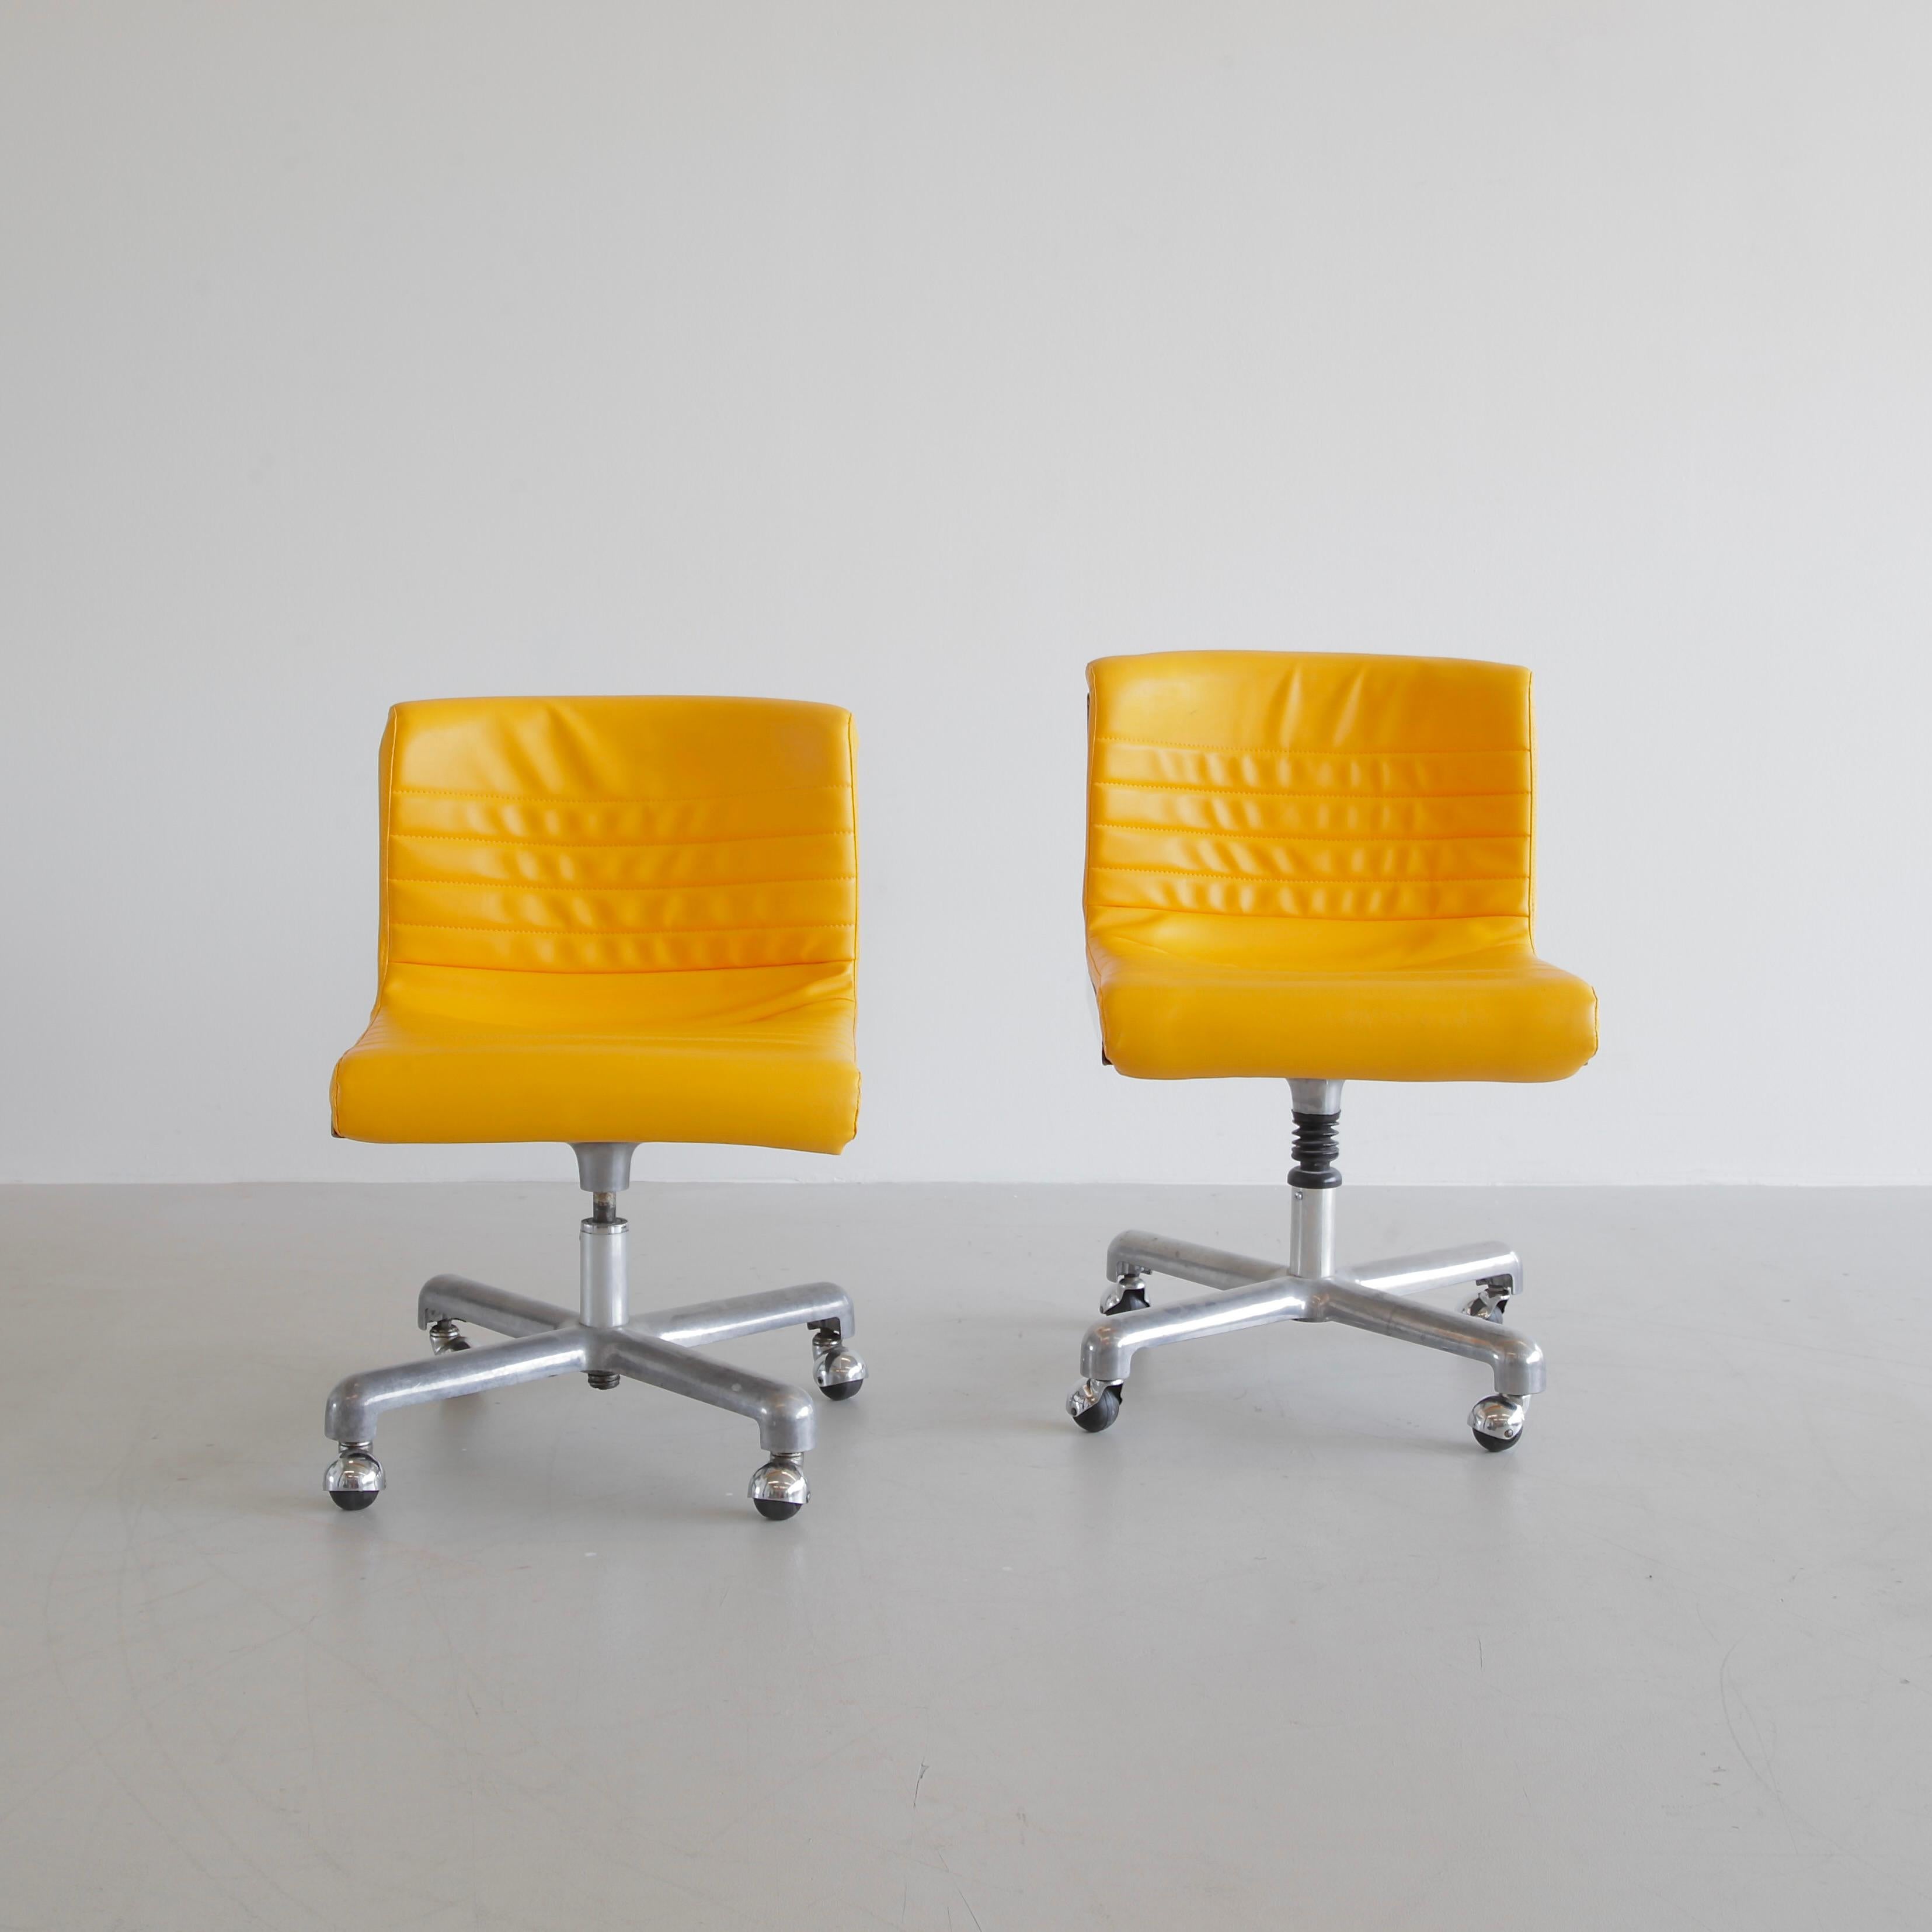 Pair of office chairs designed by Ettore Sottsass and Hans von Klier. Italy, Design Centre (Poltronova), 1969.

An original set of the 'PROGRESS' swivel chairs. Yellow leatherette upholstery, frame in cast aluminium with casters. Good vintage